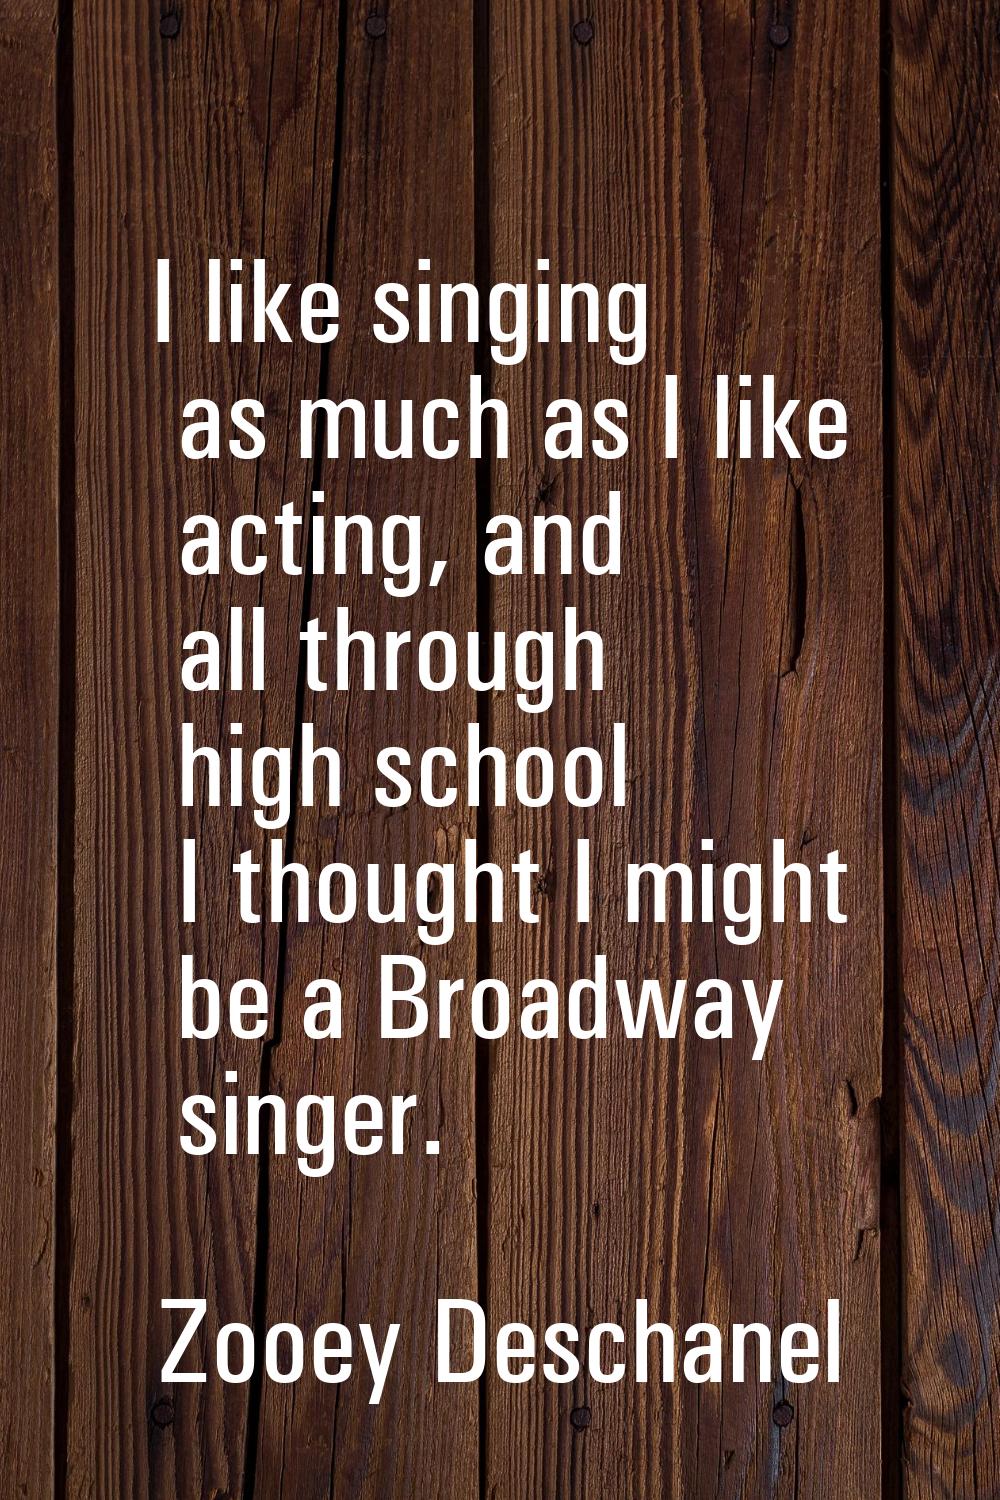 I like singing as much as I like acting, and all through high school I thought I might be a Broadwa